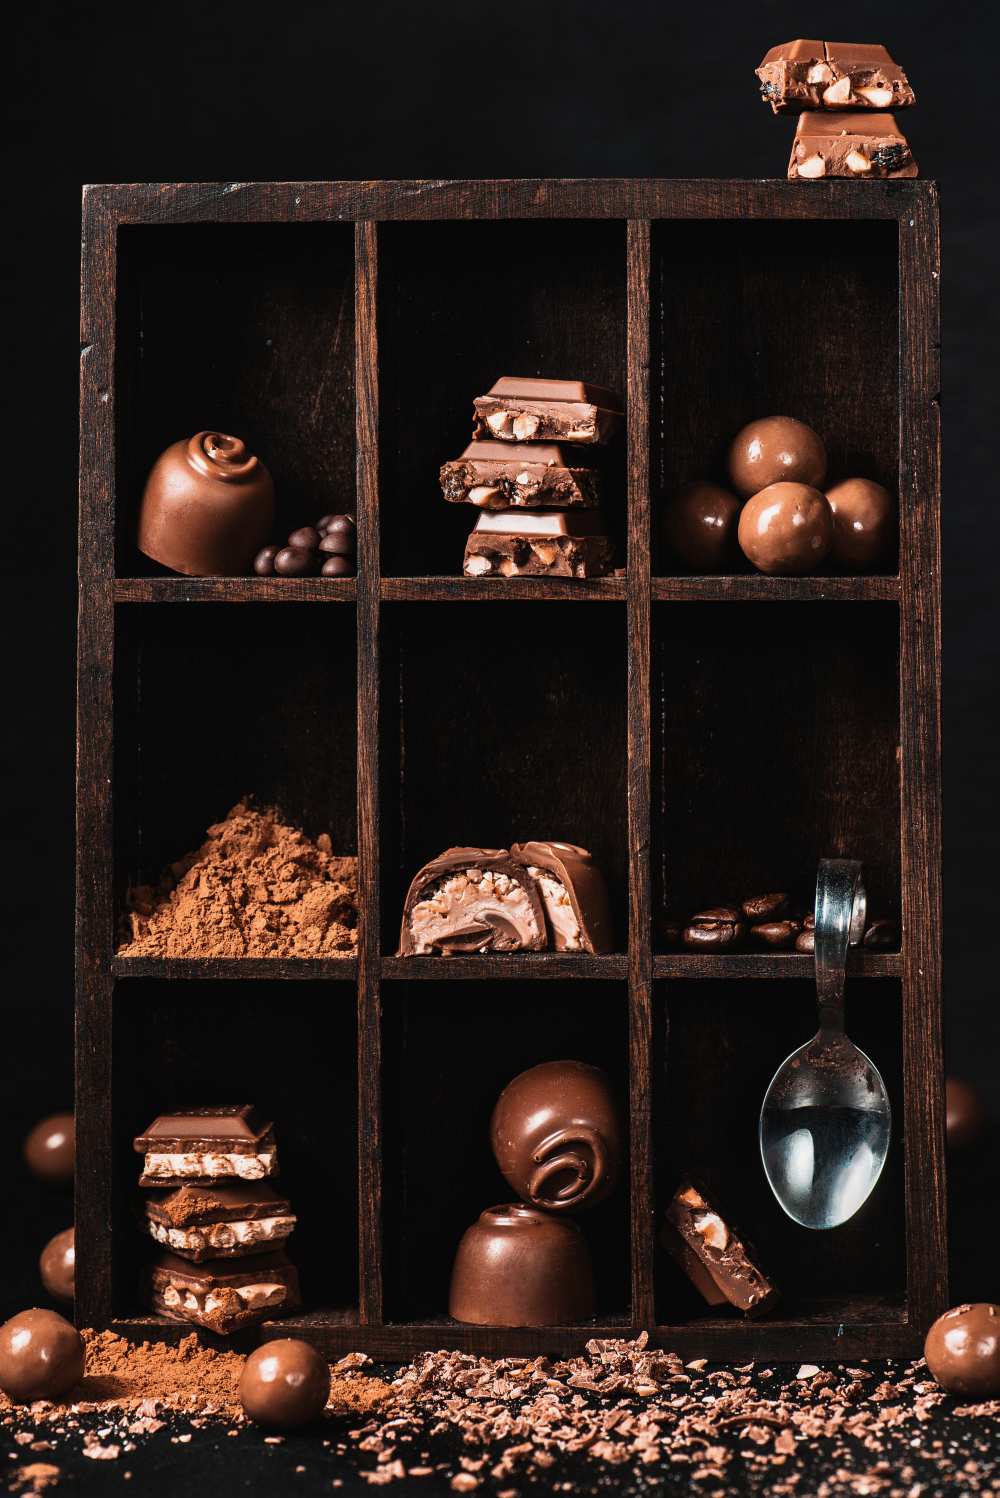 Chocolate collection from Dina Belenko